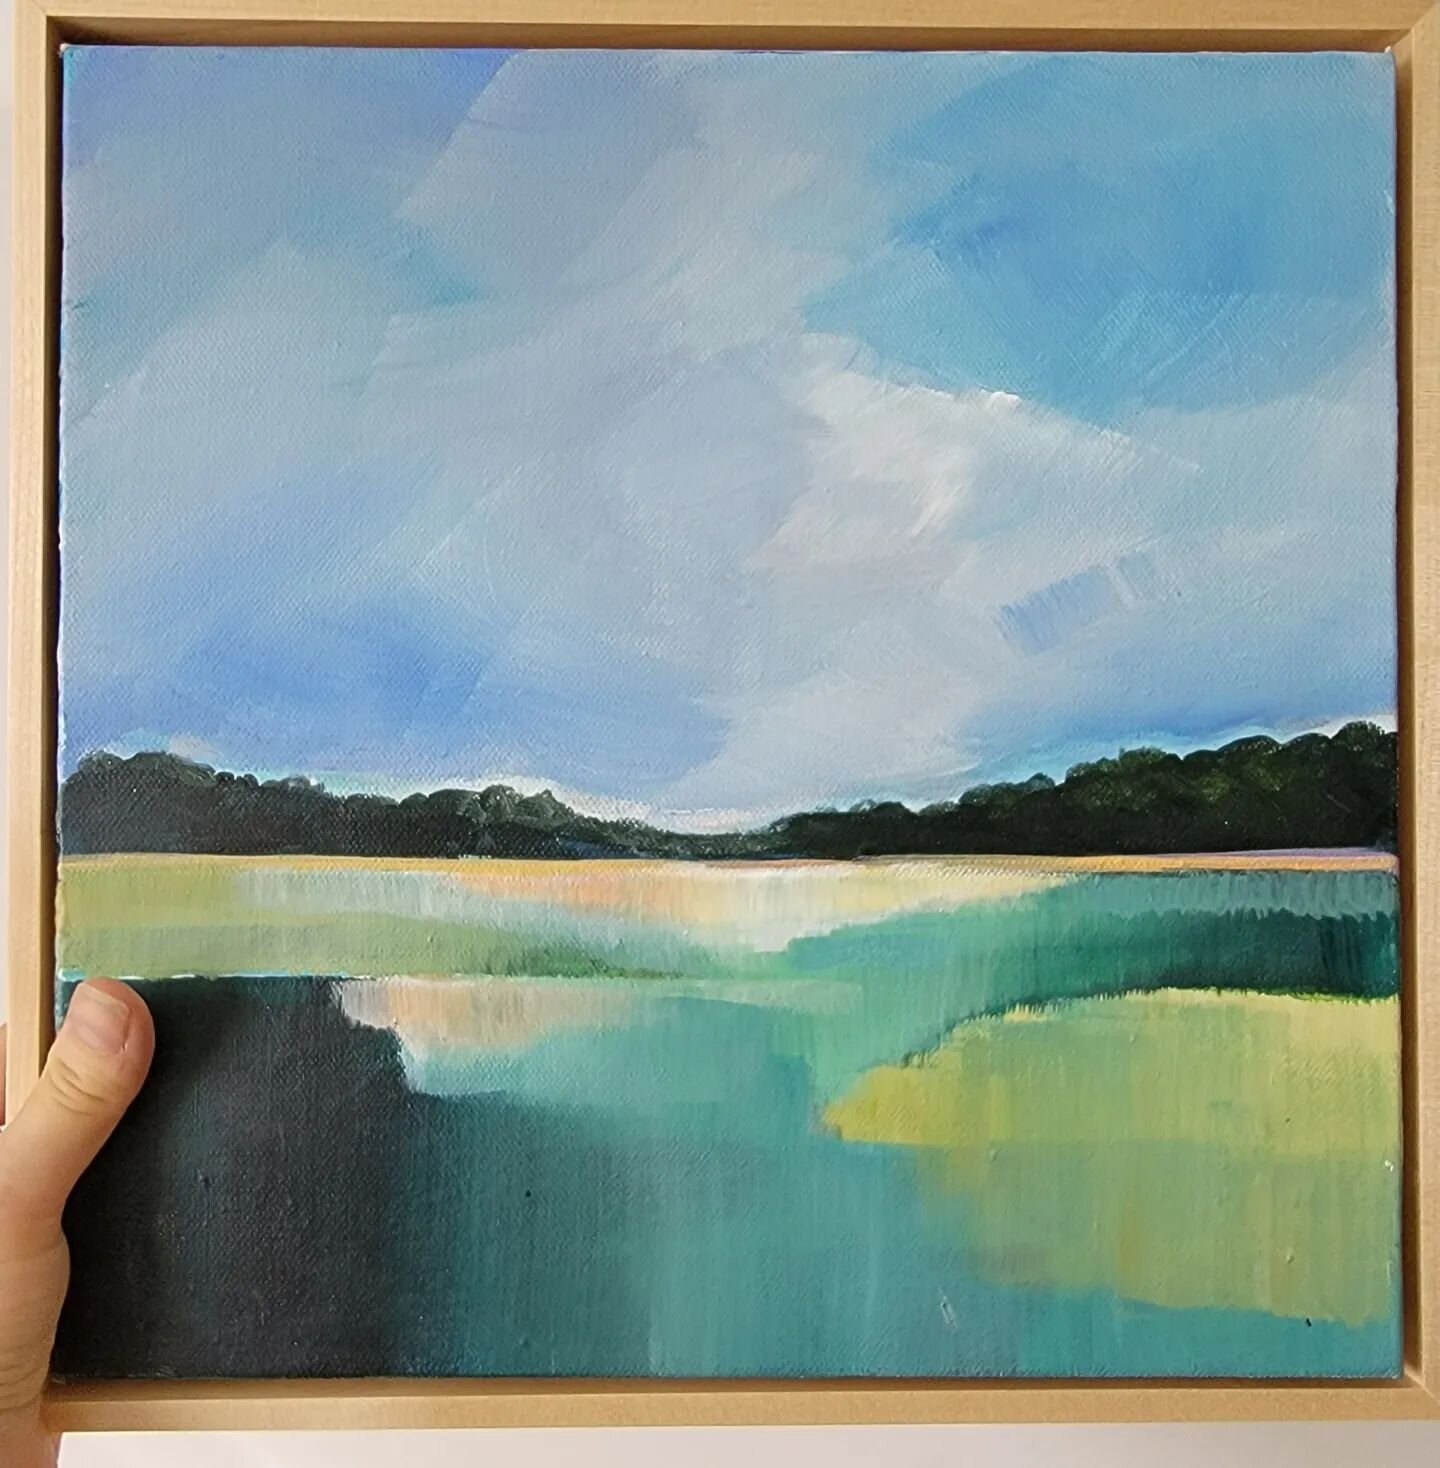 And another sale! I think I painted this during covid. I had been looking for colors and techniques to bring peace and joy into my life. So glad it has finally been sold. Onto a new home!